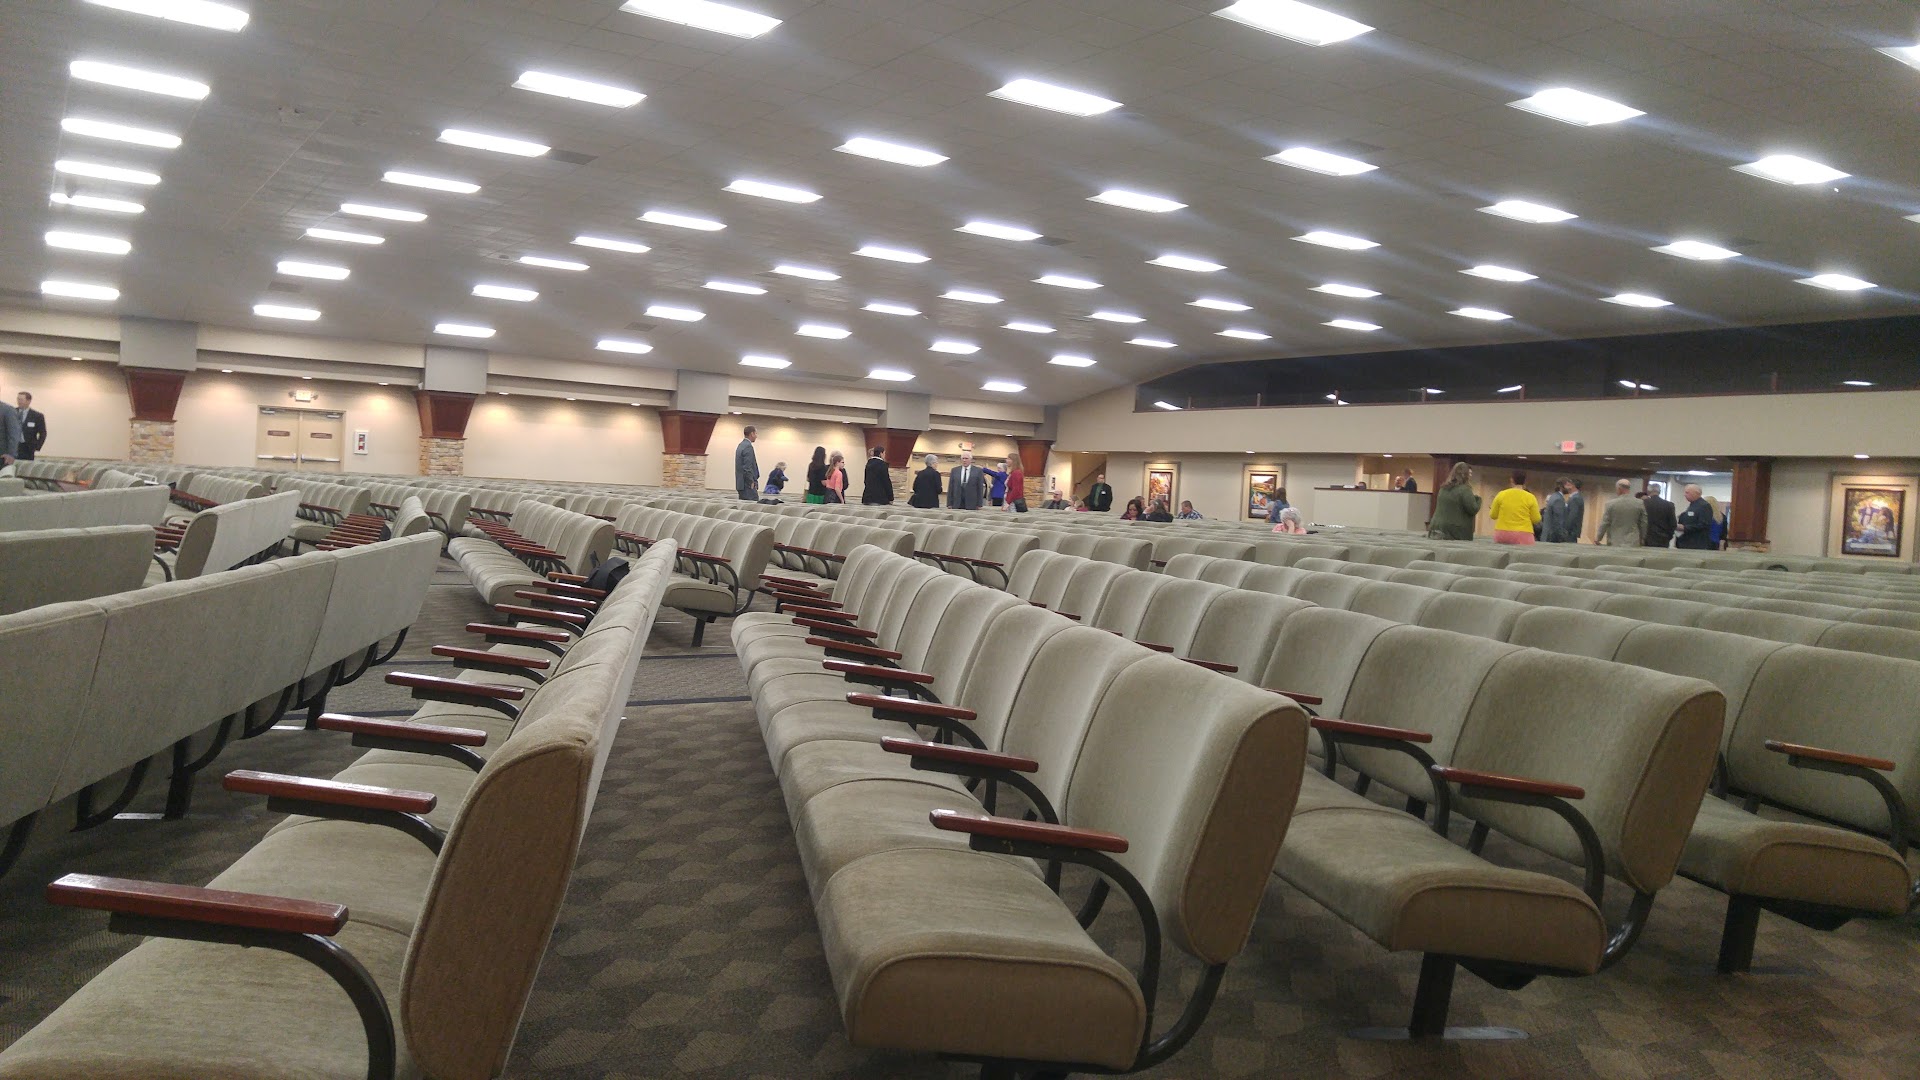 Assembly Hall of Jehovah's Witnesses